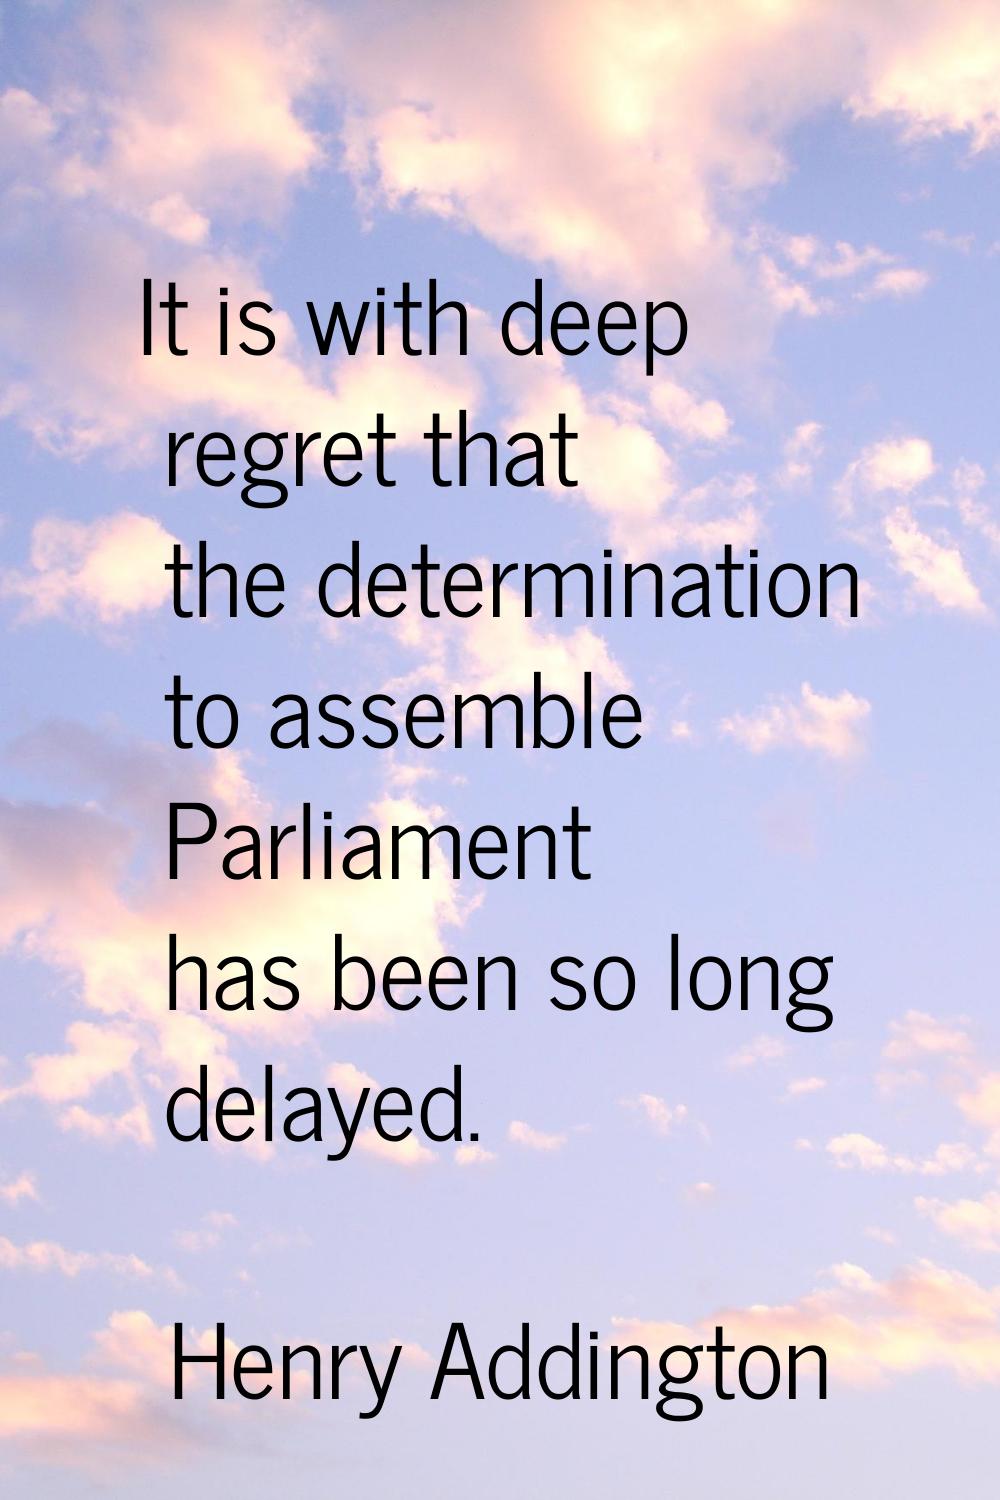 It is with deep regret that the determination to assemble Parliament has been so long delayed.